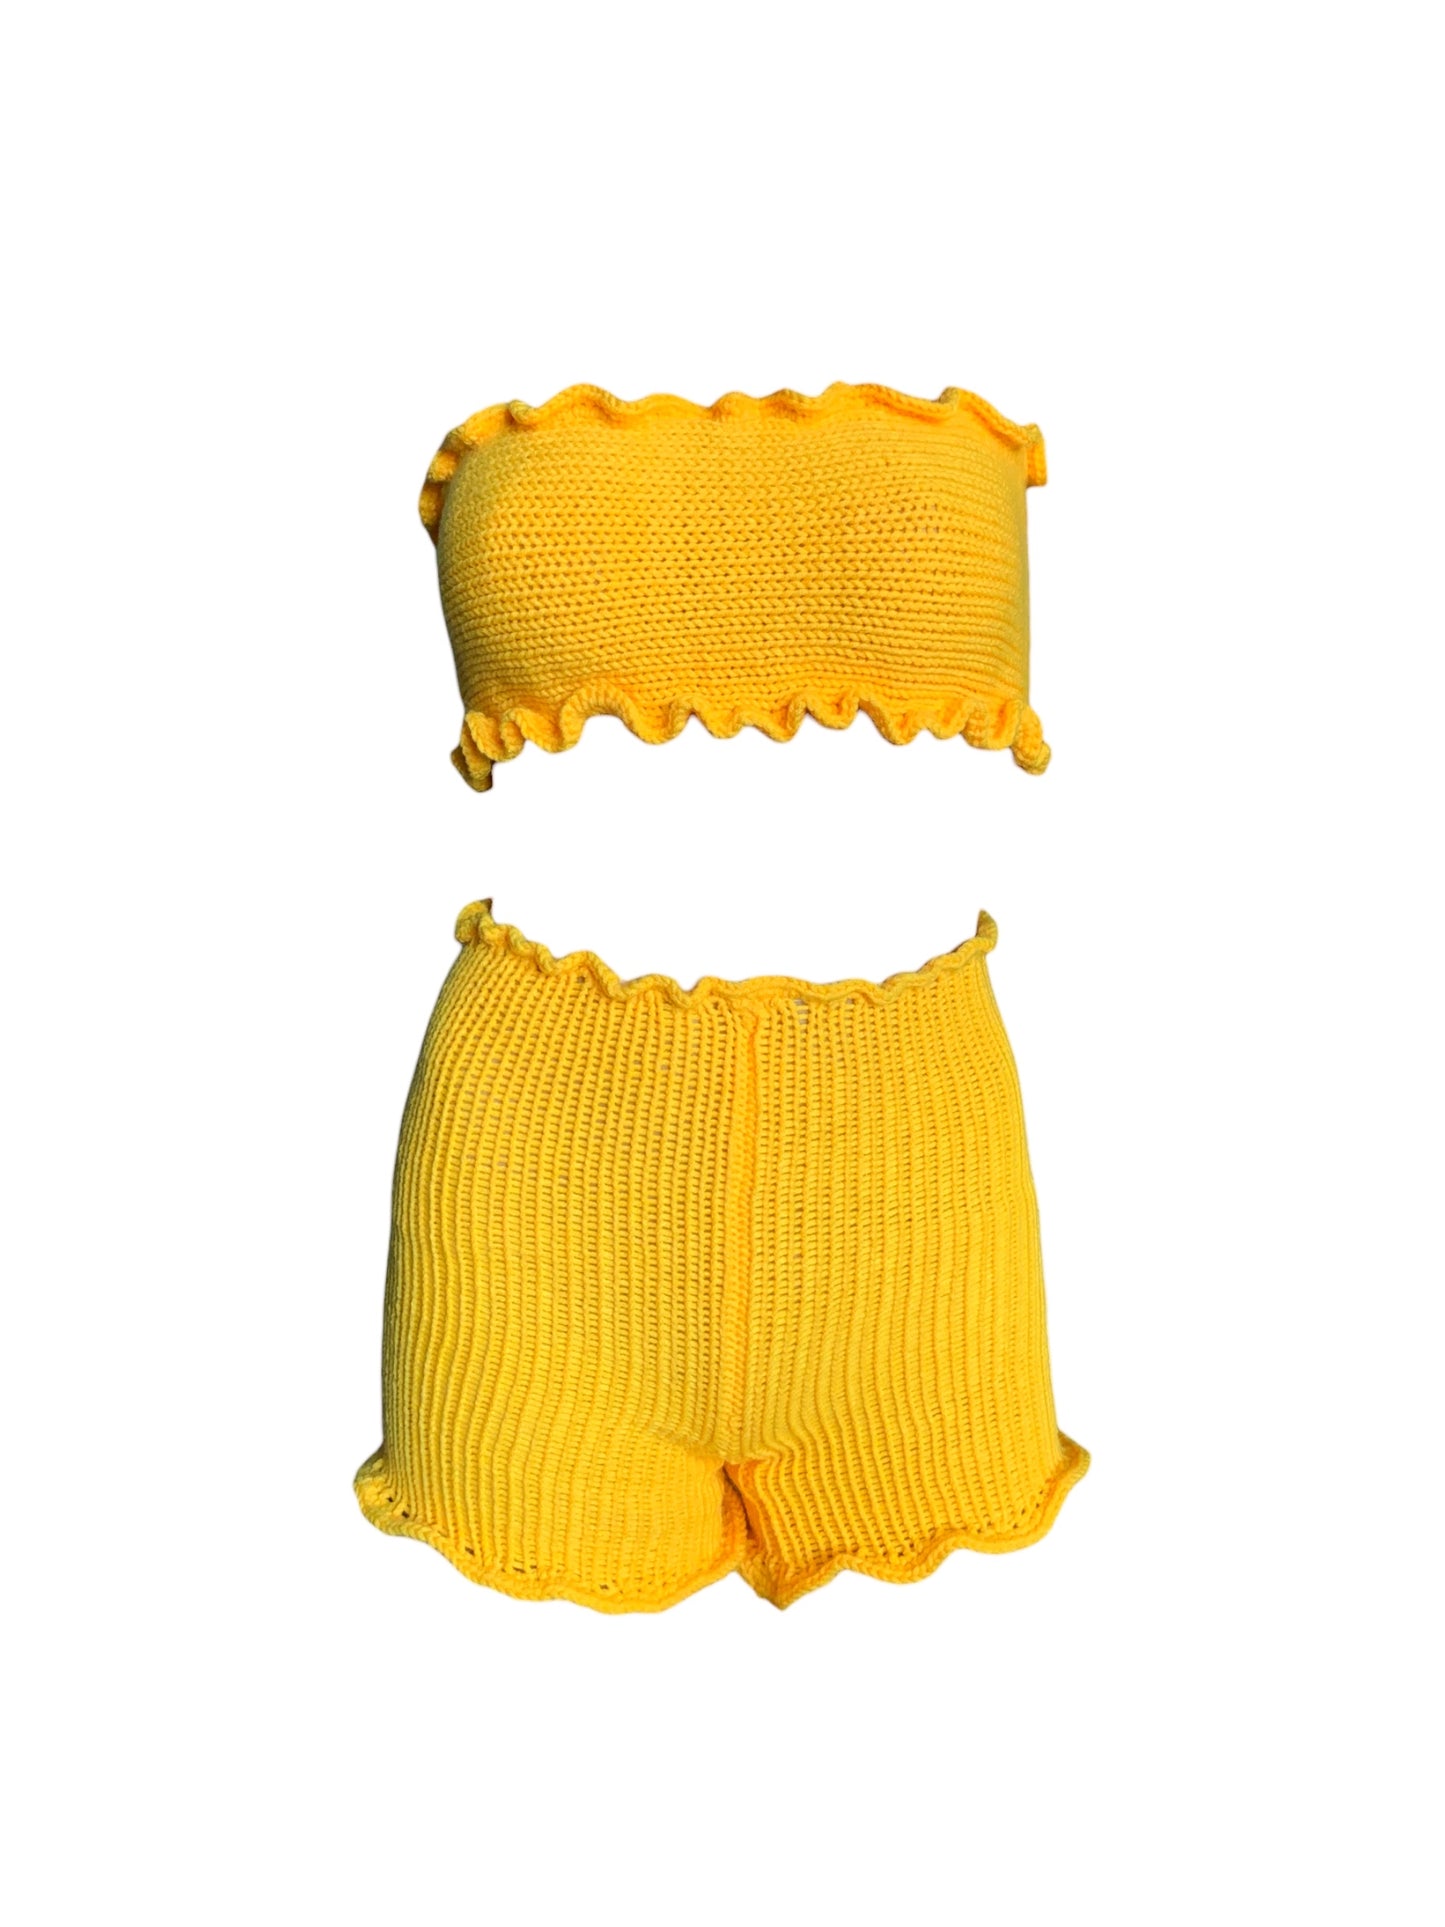 Oopsie Daisy Knitted Shorts Set